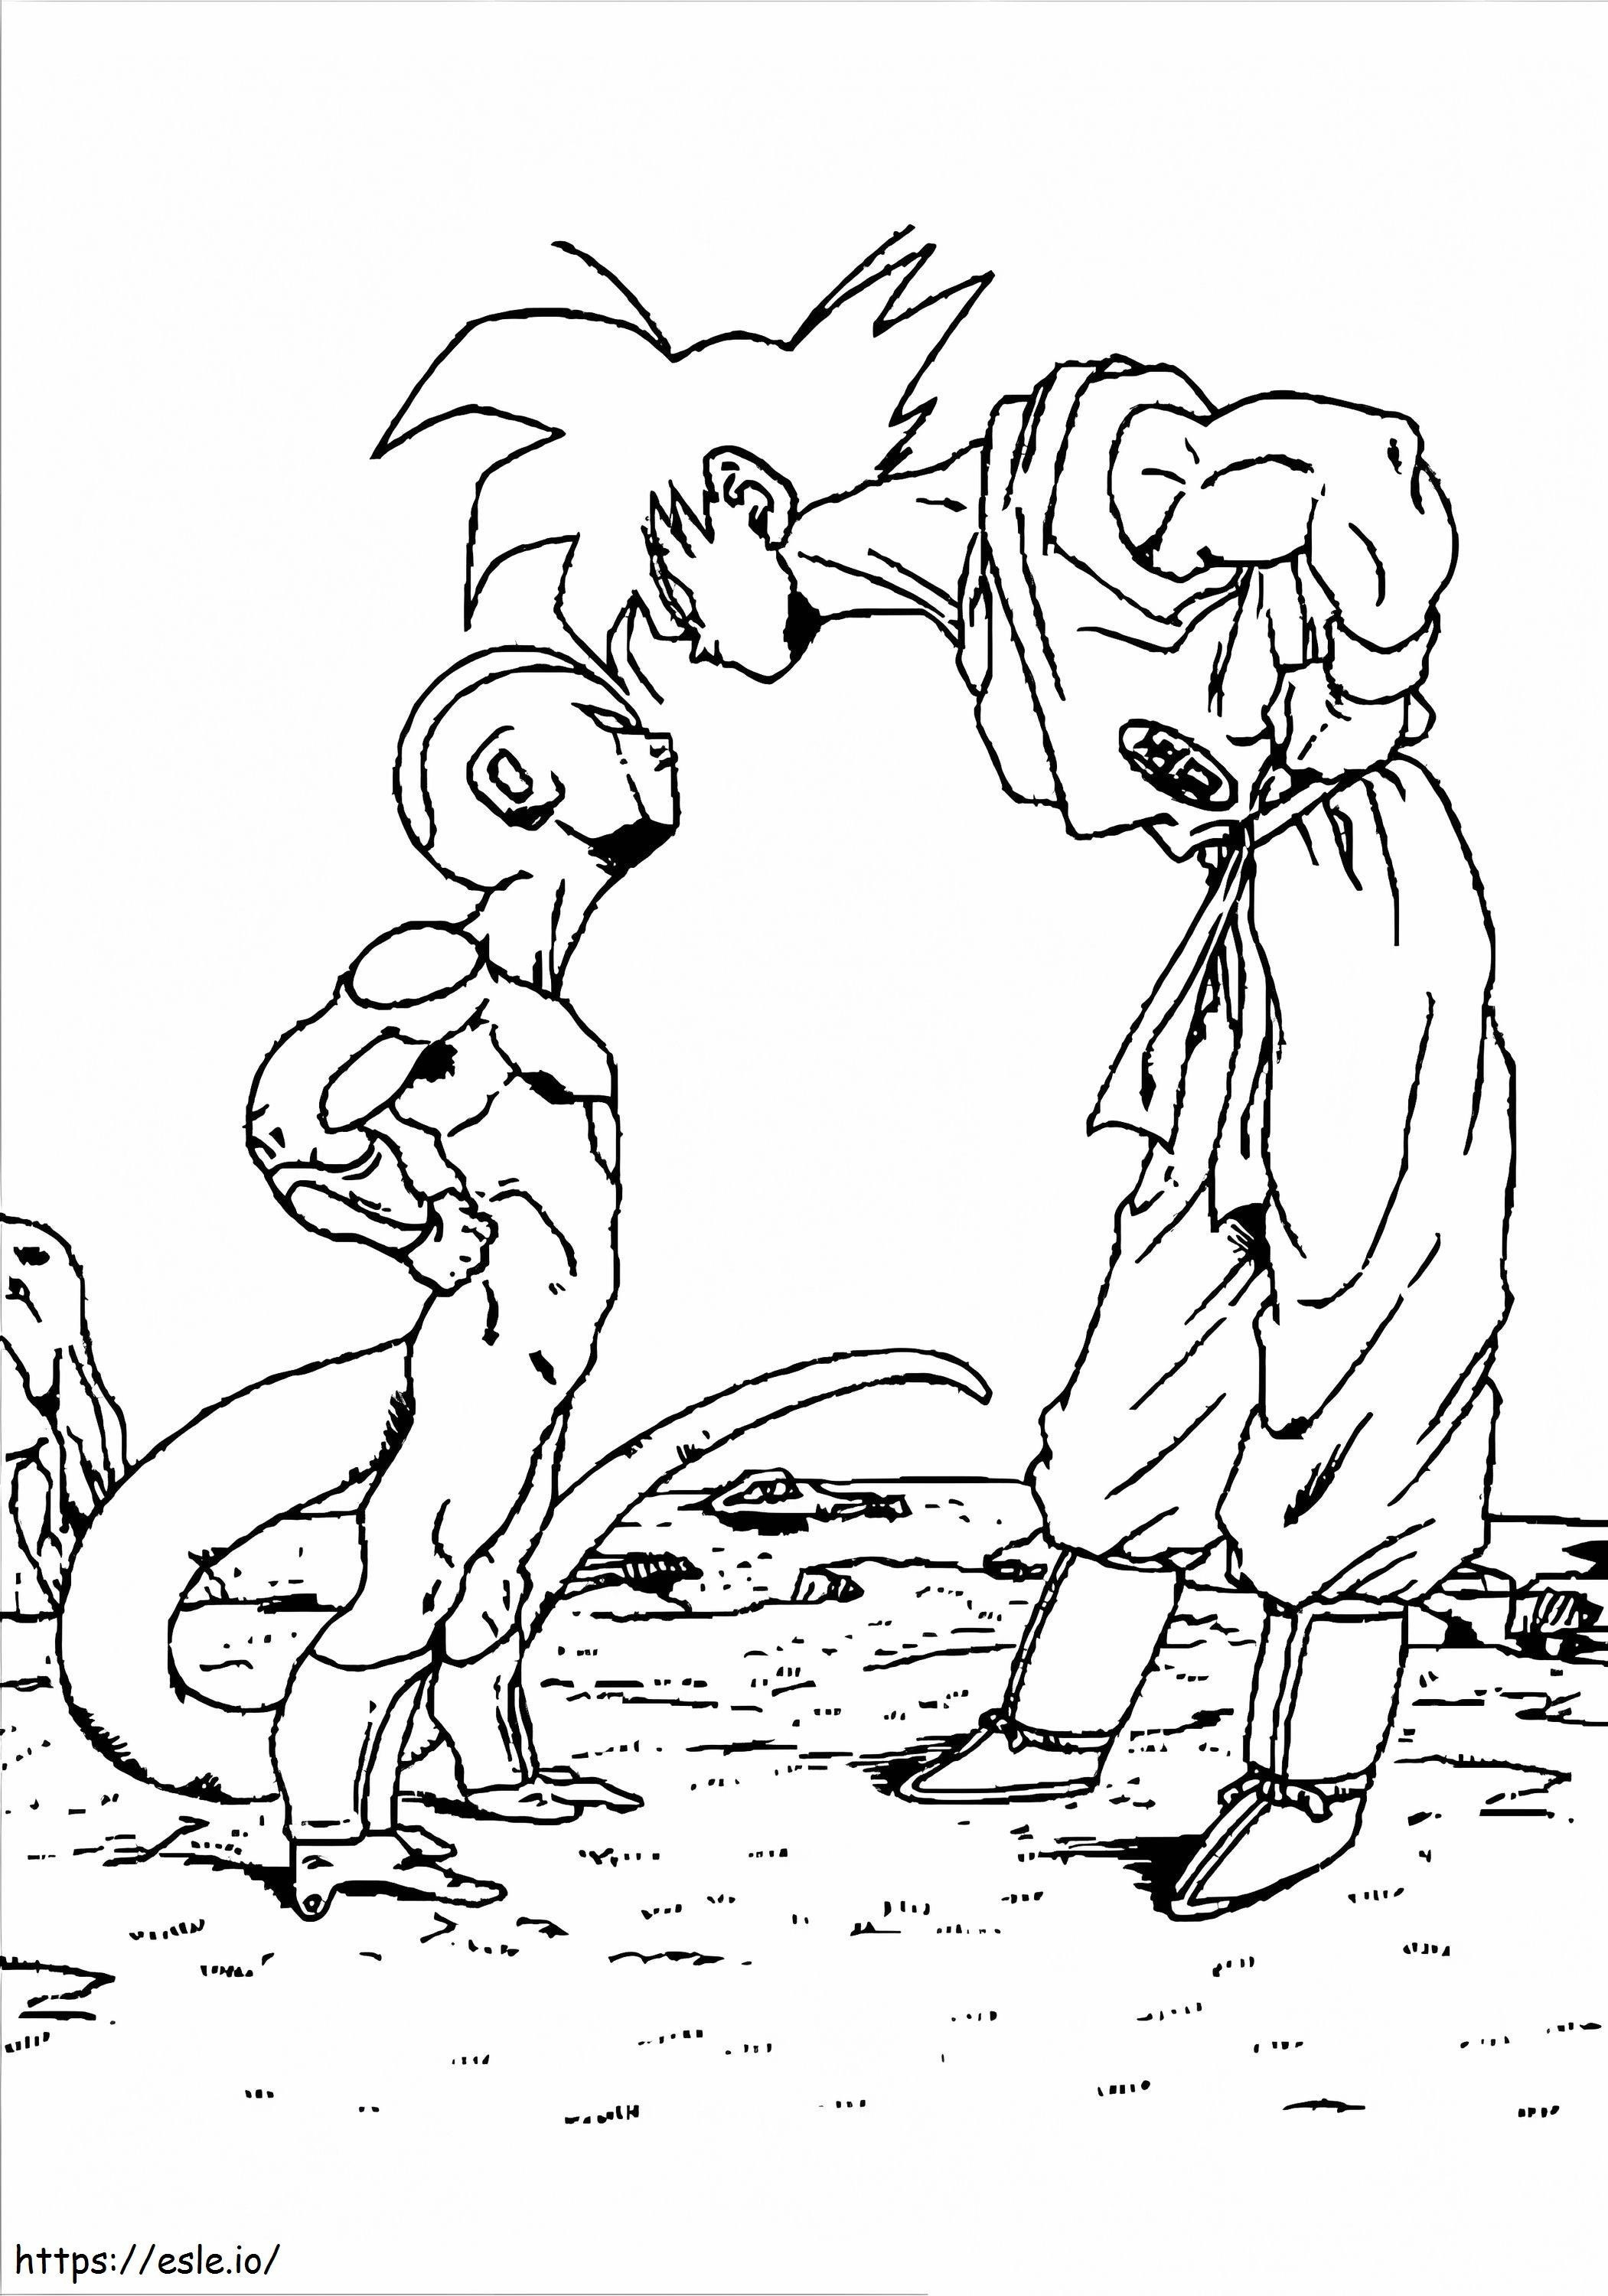 Son Goku And Frieza coloring page